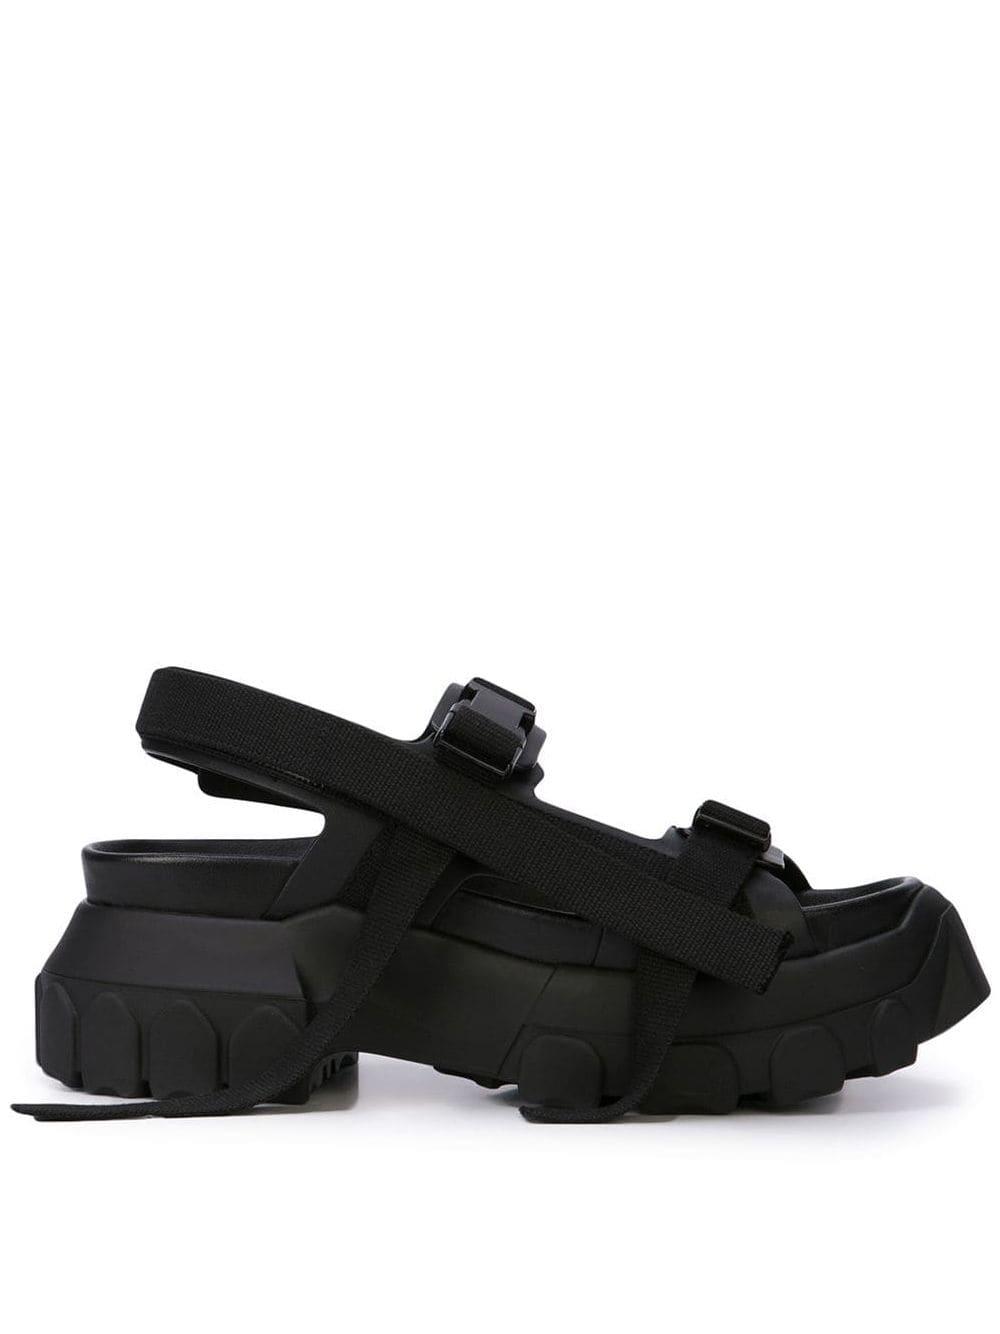 Rick Owens Babel Tractor Sandals in Black | Lyst